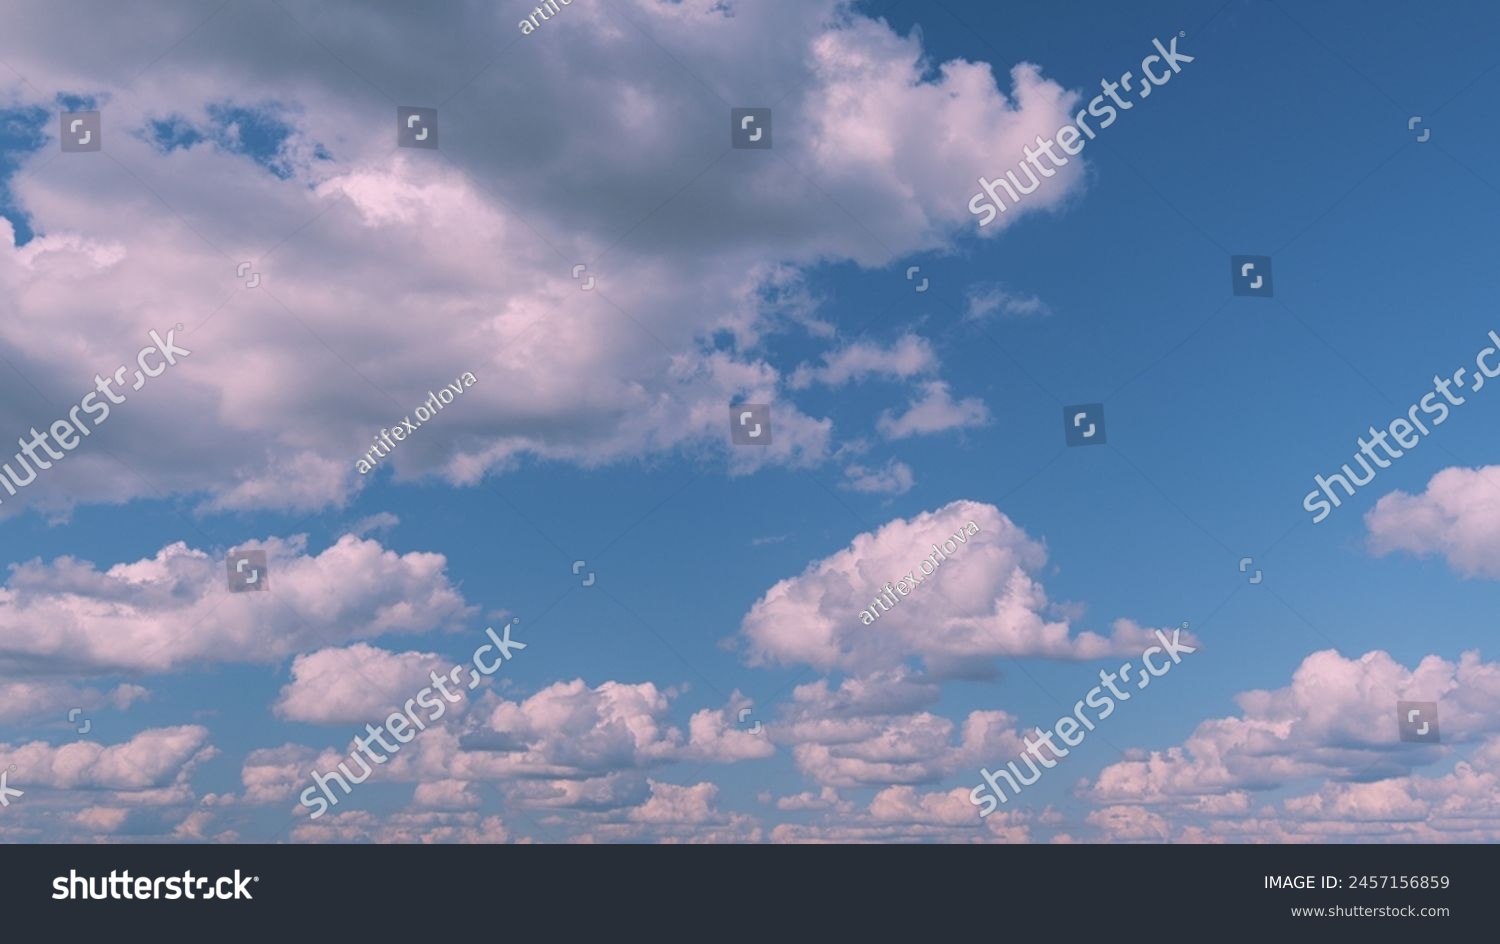 Purple Afternoon Sky And Clouds. Background Of Blue Sky With Pale Pink Clouds At Day. #2457156859